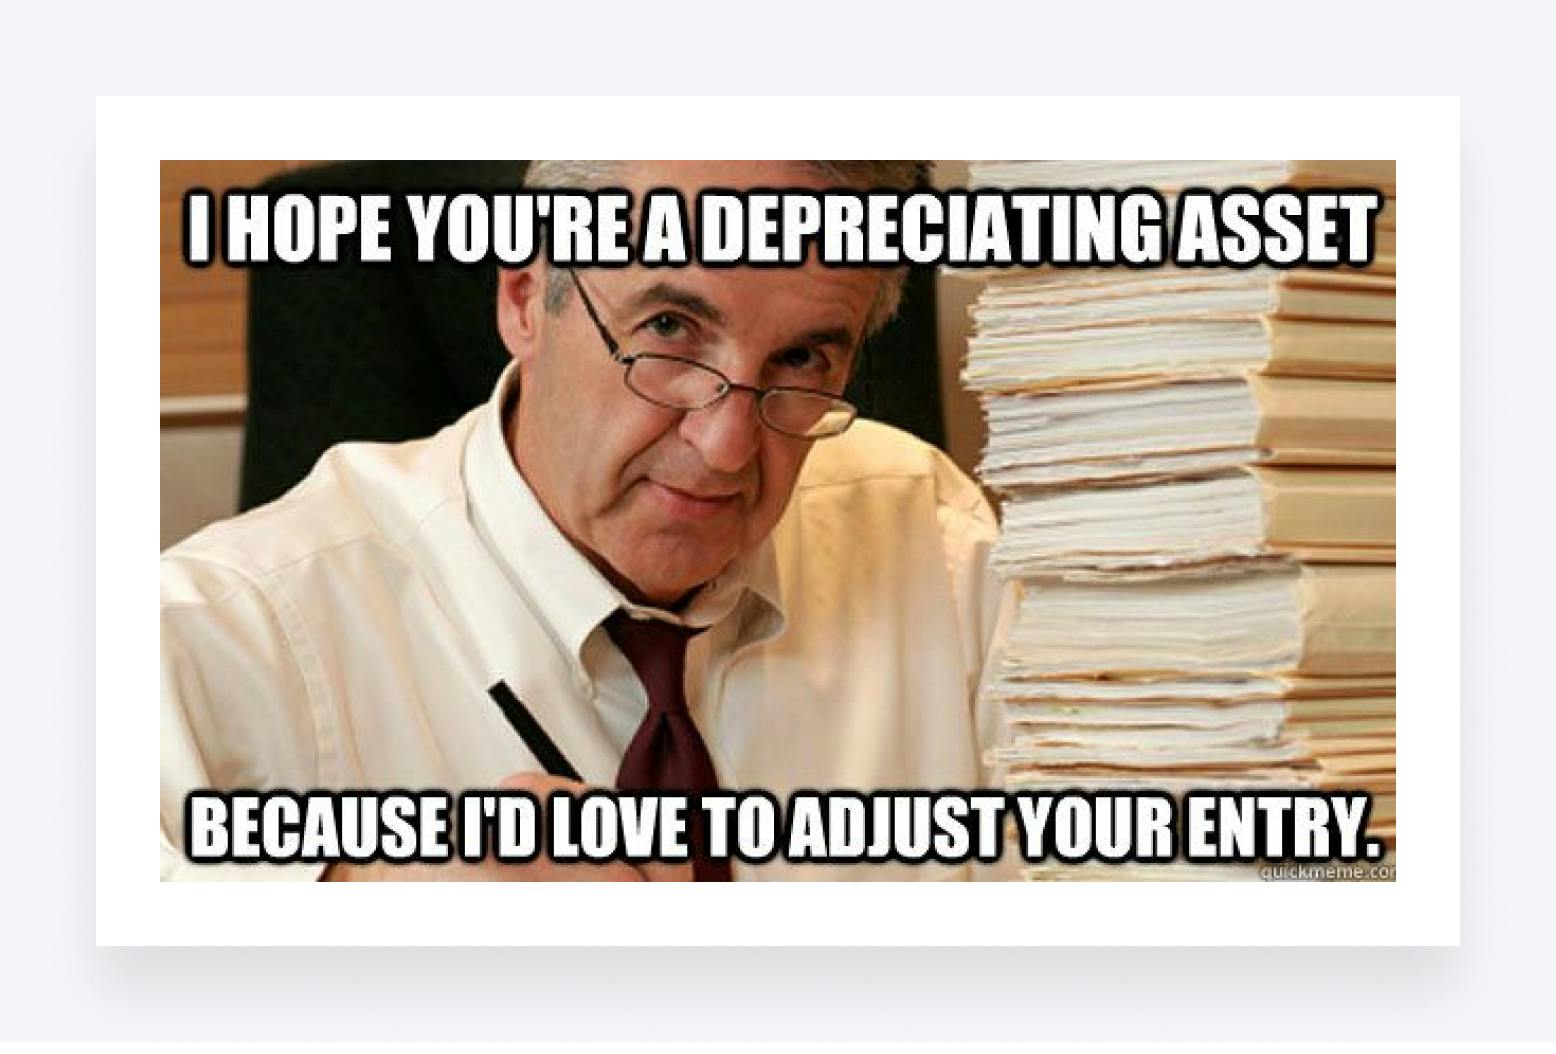 Accounting pickup line that you should only use on another accountant to avoid getting a blank stare